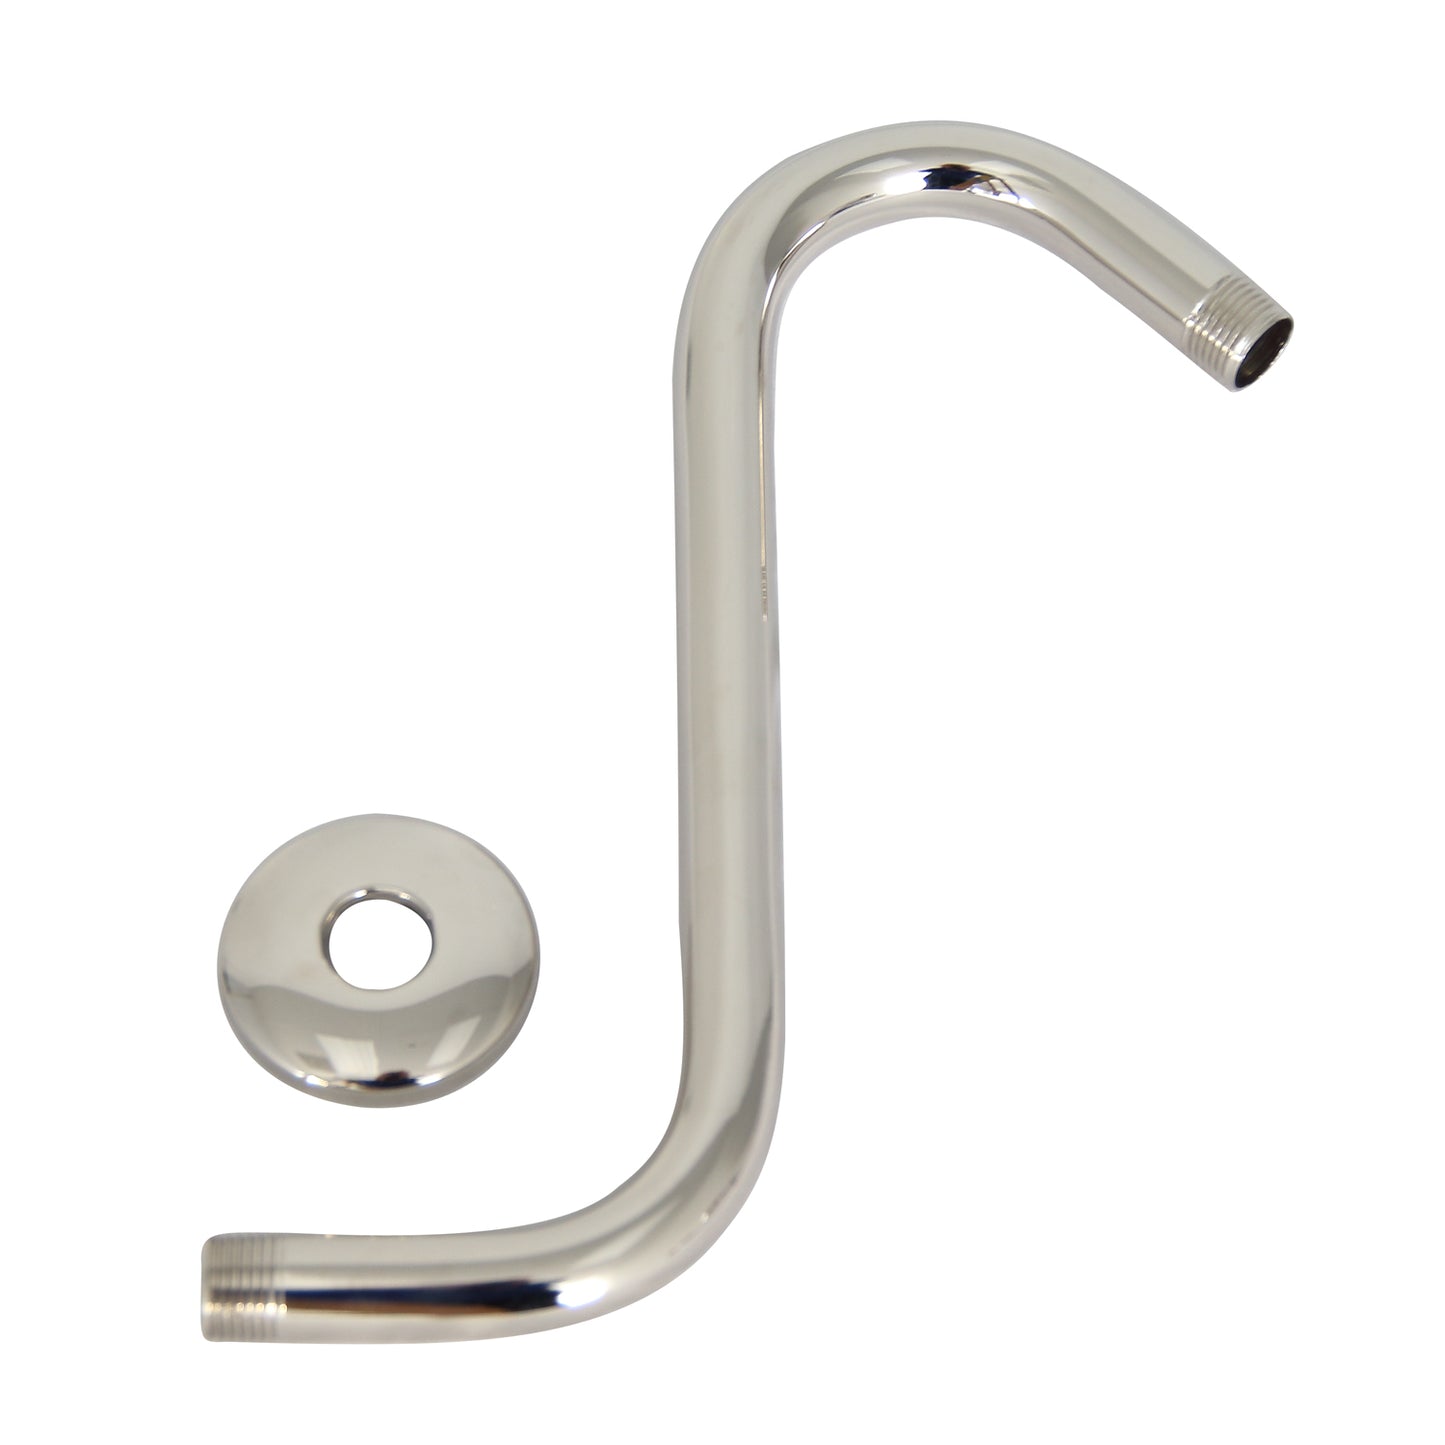 8" Offset Shower Head "S" Arm with Flange Polished Nickel